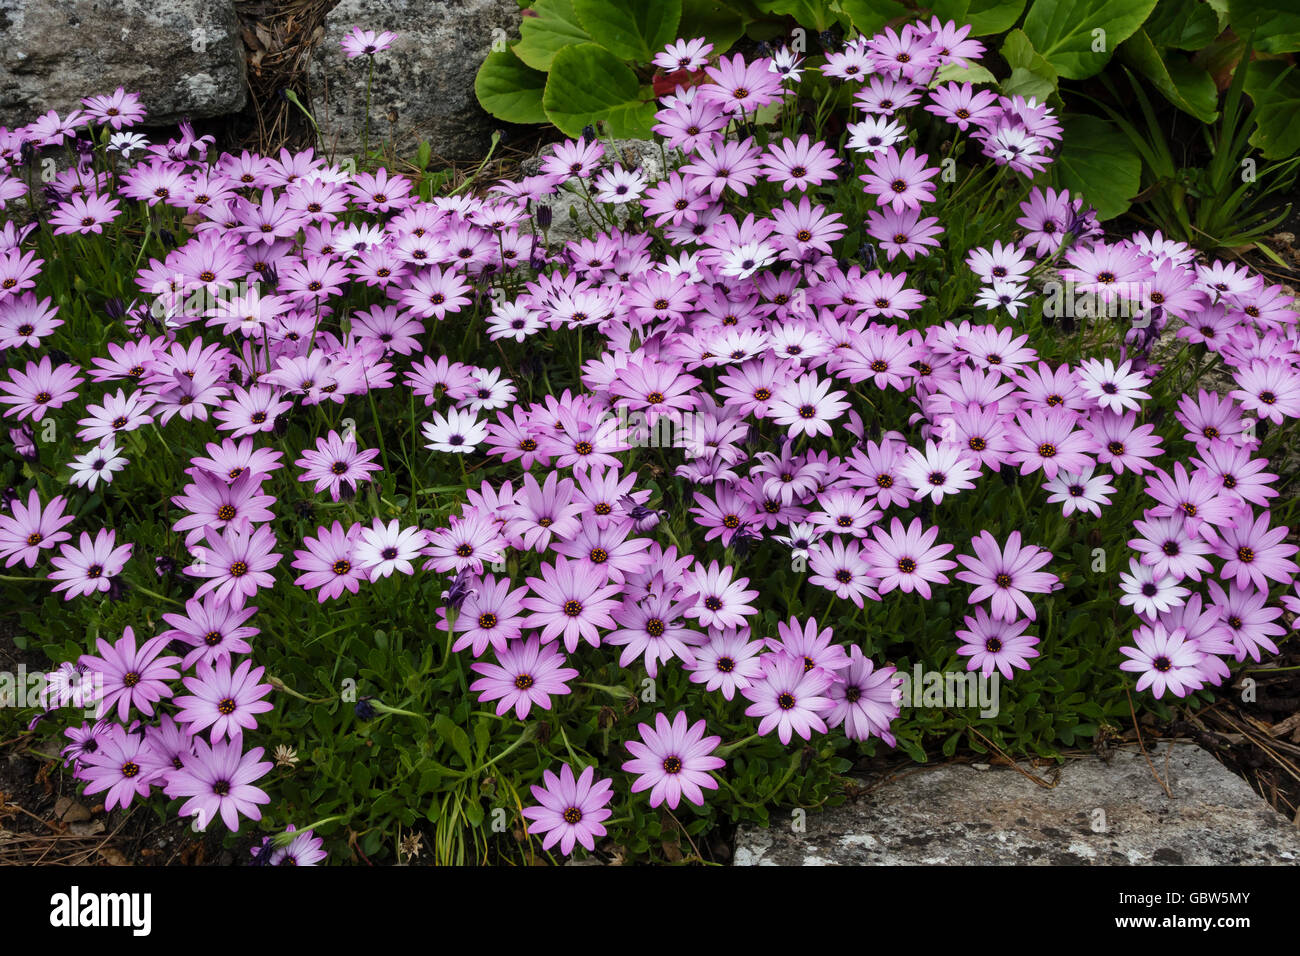 Osteospermum or African Daisy or South African Daisy in a UK garden (Asteraceae family) Stock Photo